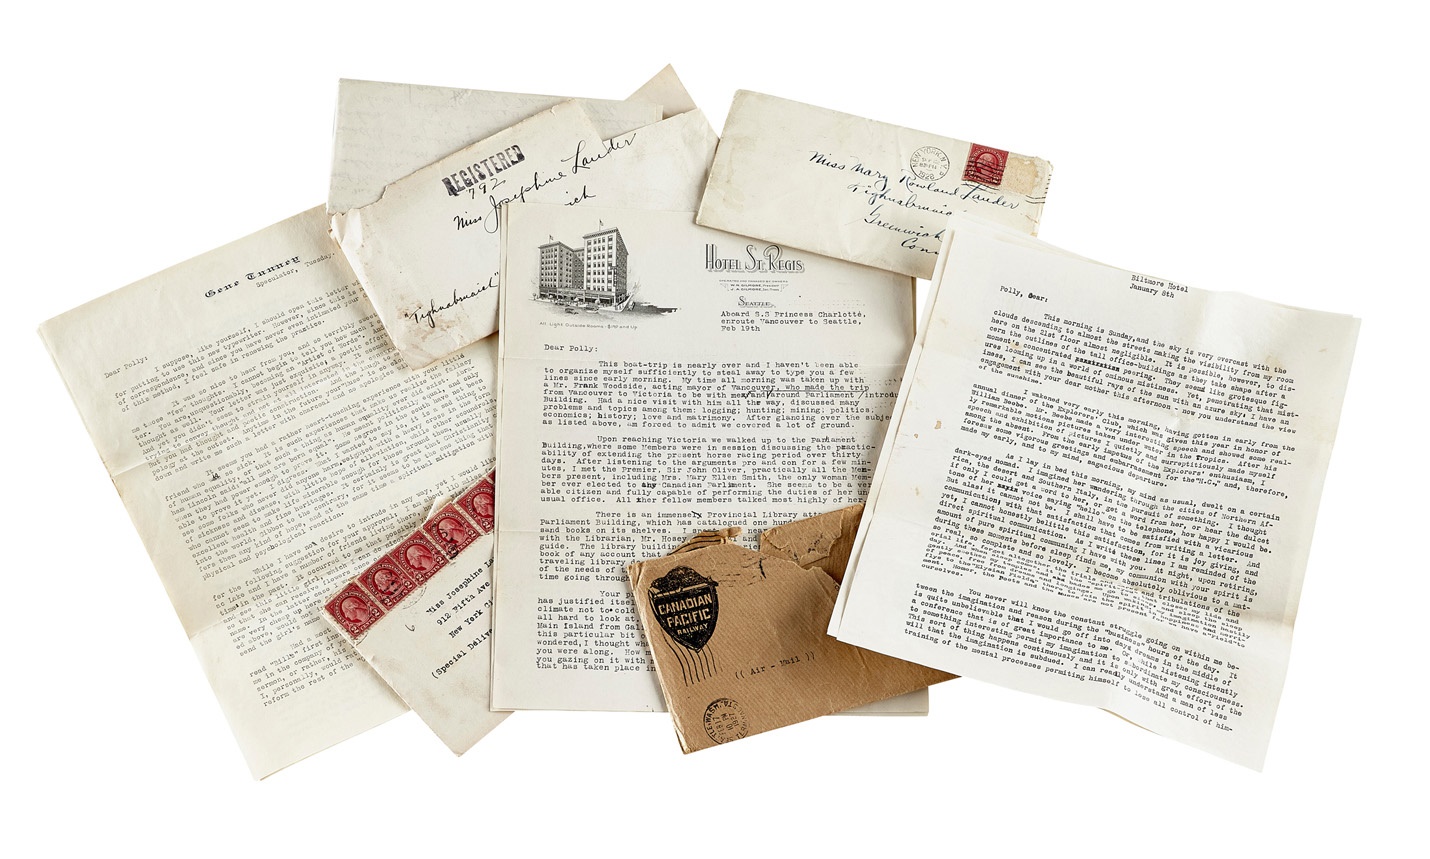 Muhammad Ali & Boxing - Gene Tunney Letter Collection (7)